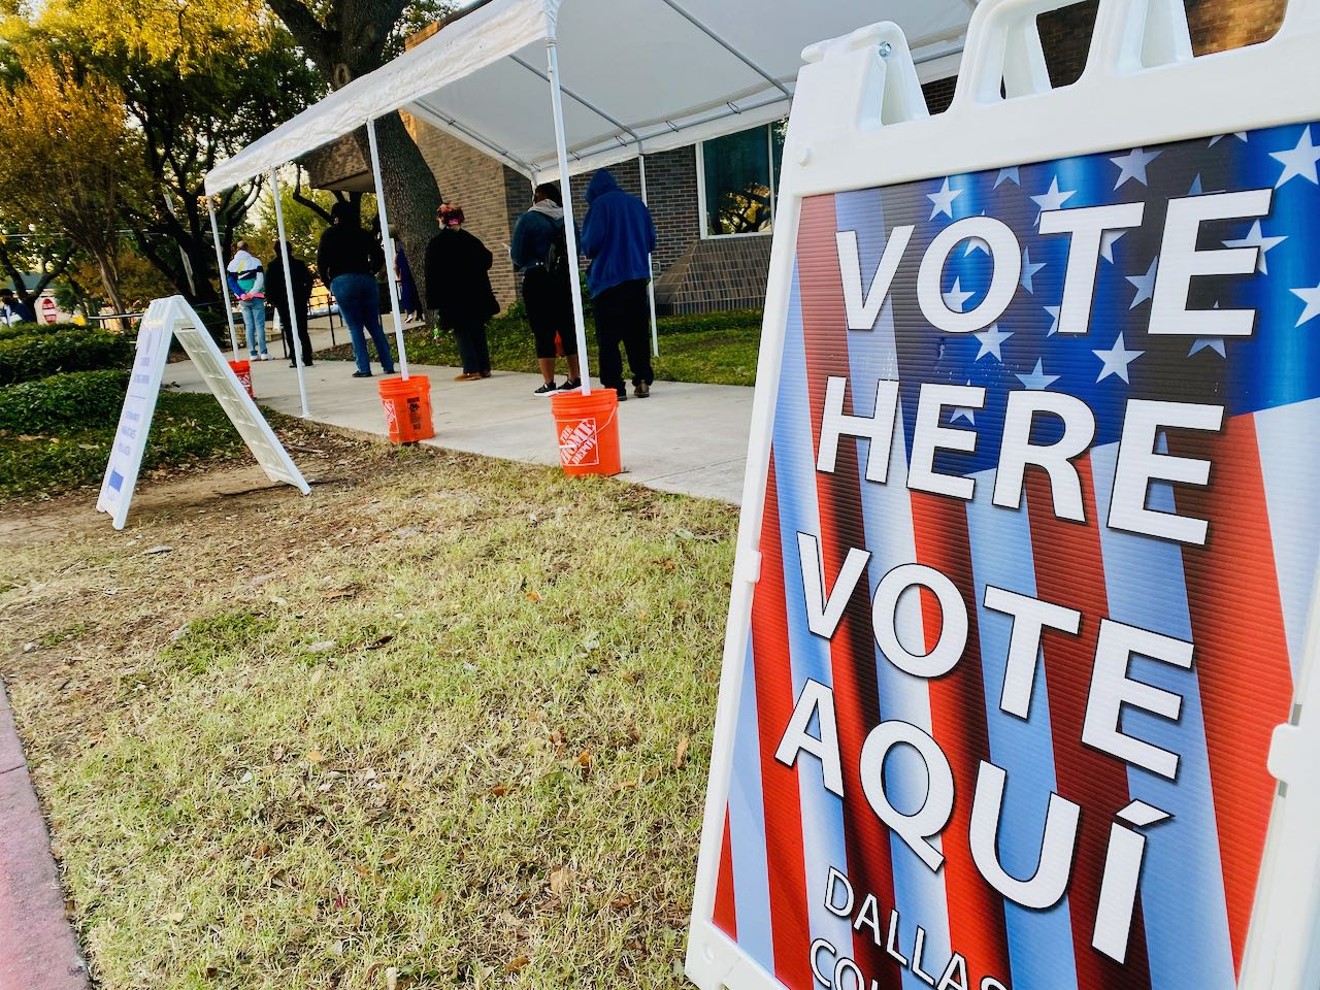 Over 40 candidates are in the running for seats on the Dallas City Council.